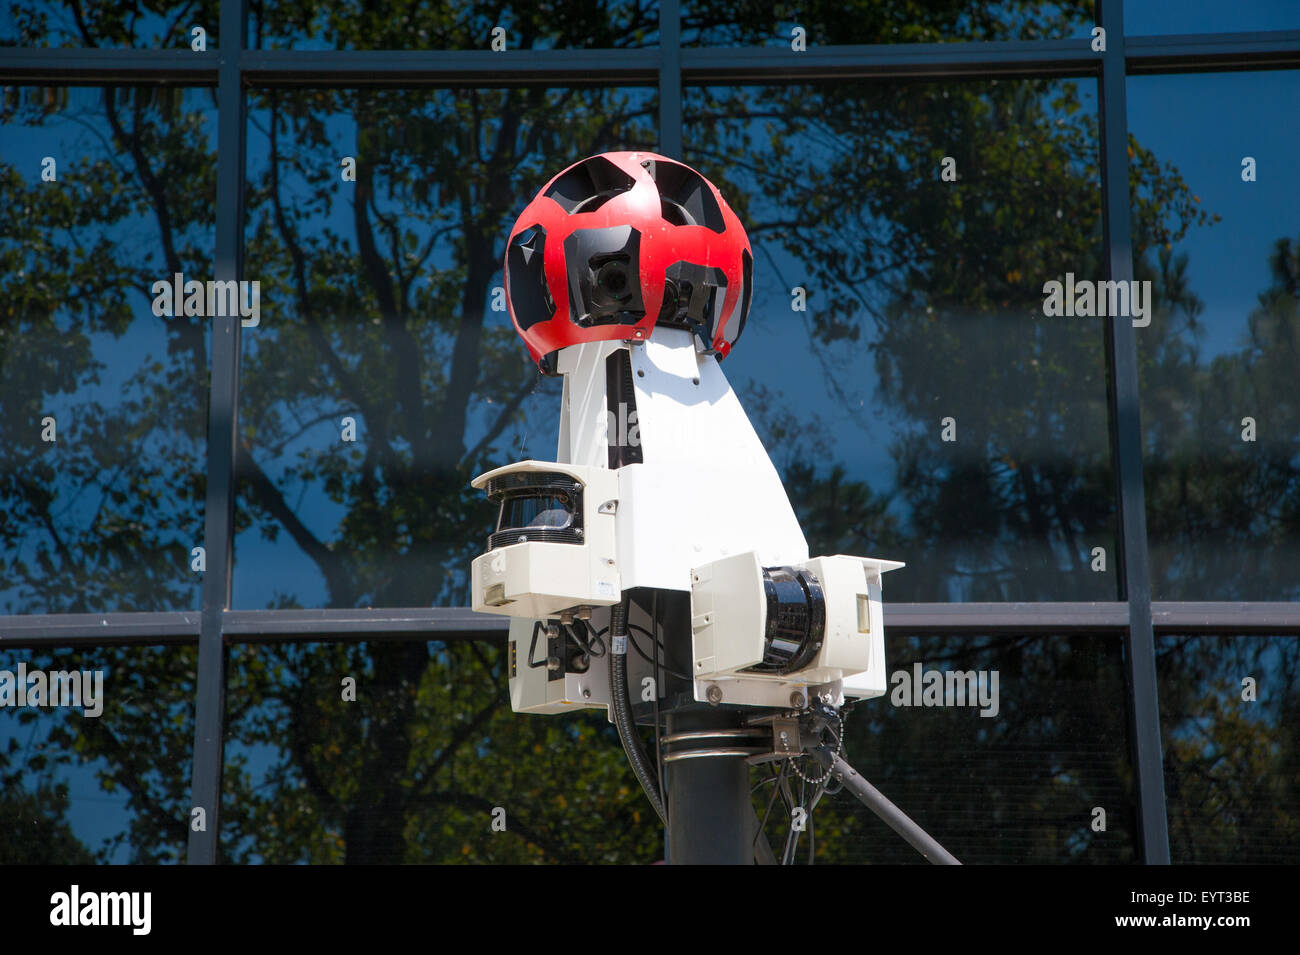 MOUNTAIN VIEW, CA - AUGUST 1, 2015: Google's Street View cameras mounted ona car on display at Google headquarters in Mountain V Stock Photo